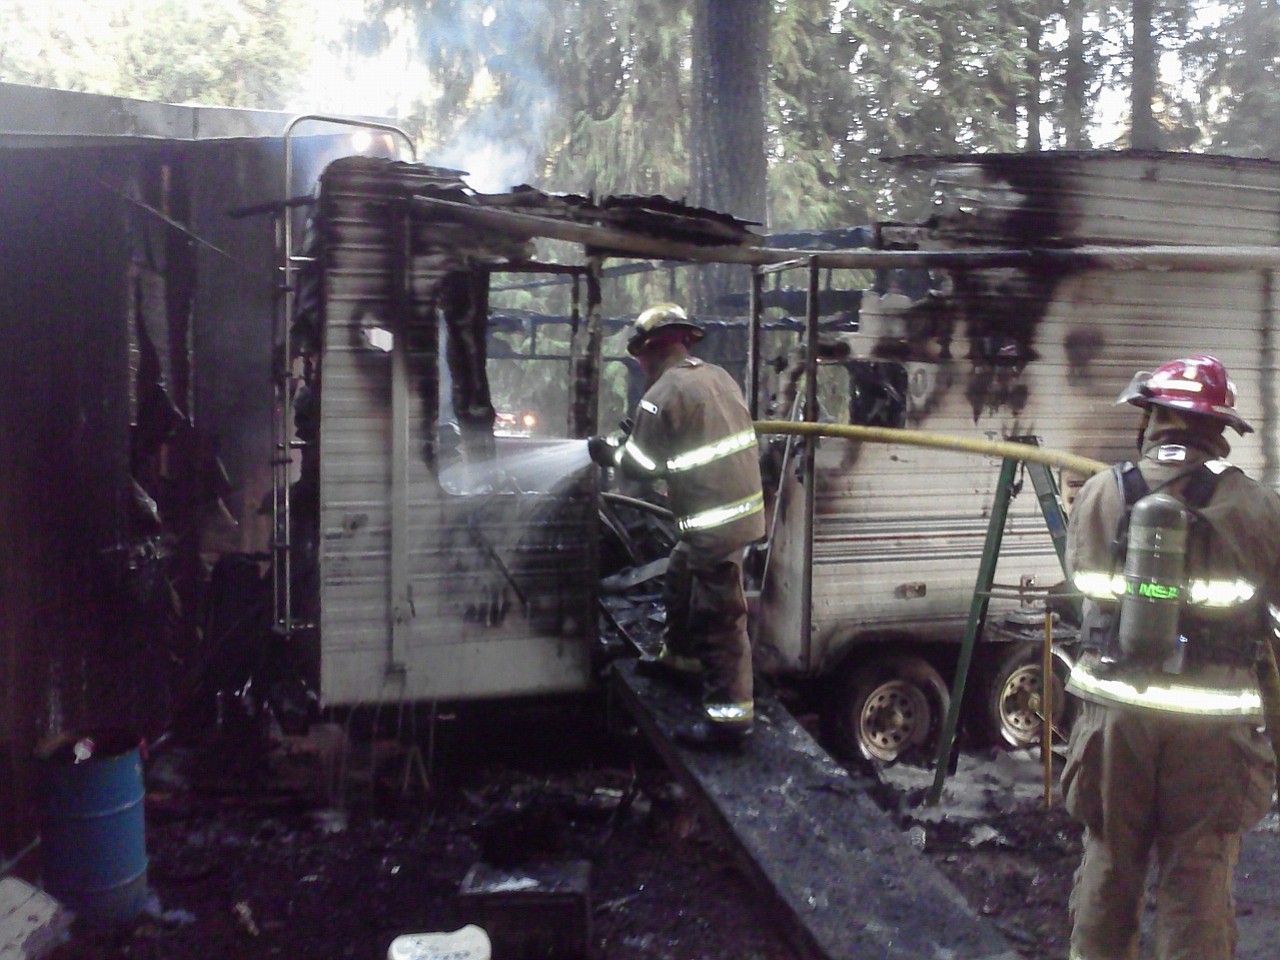 A trailer was destroyed and a cat is missing following a Sunday evening fire in Brush Prairie.